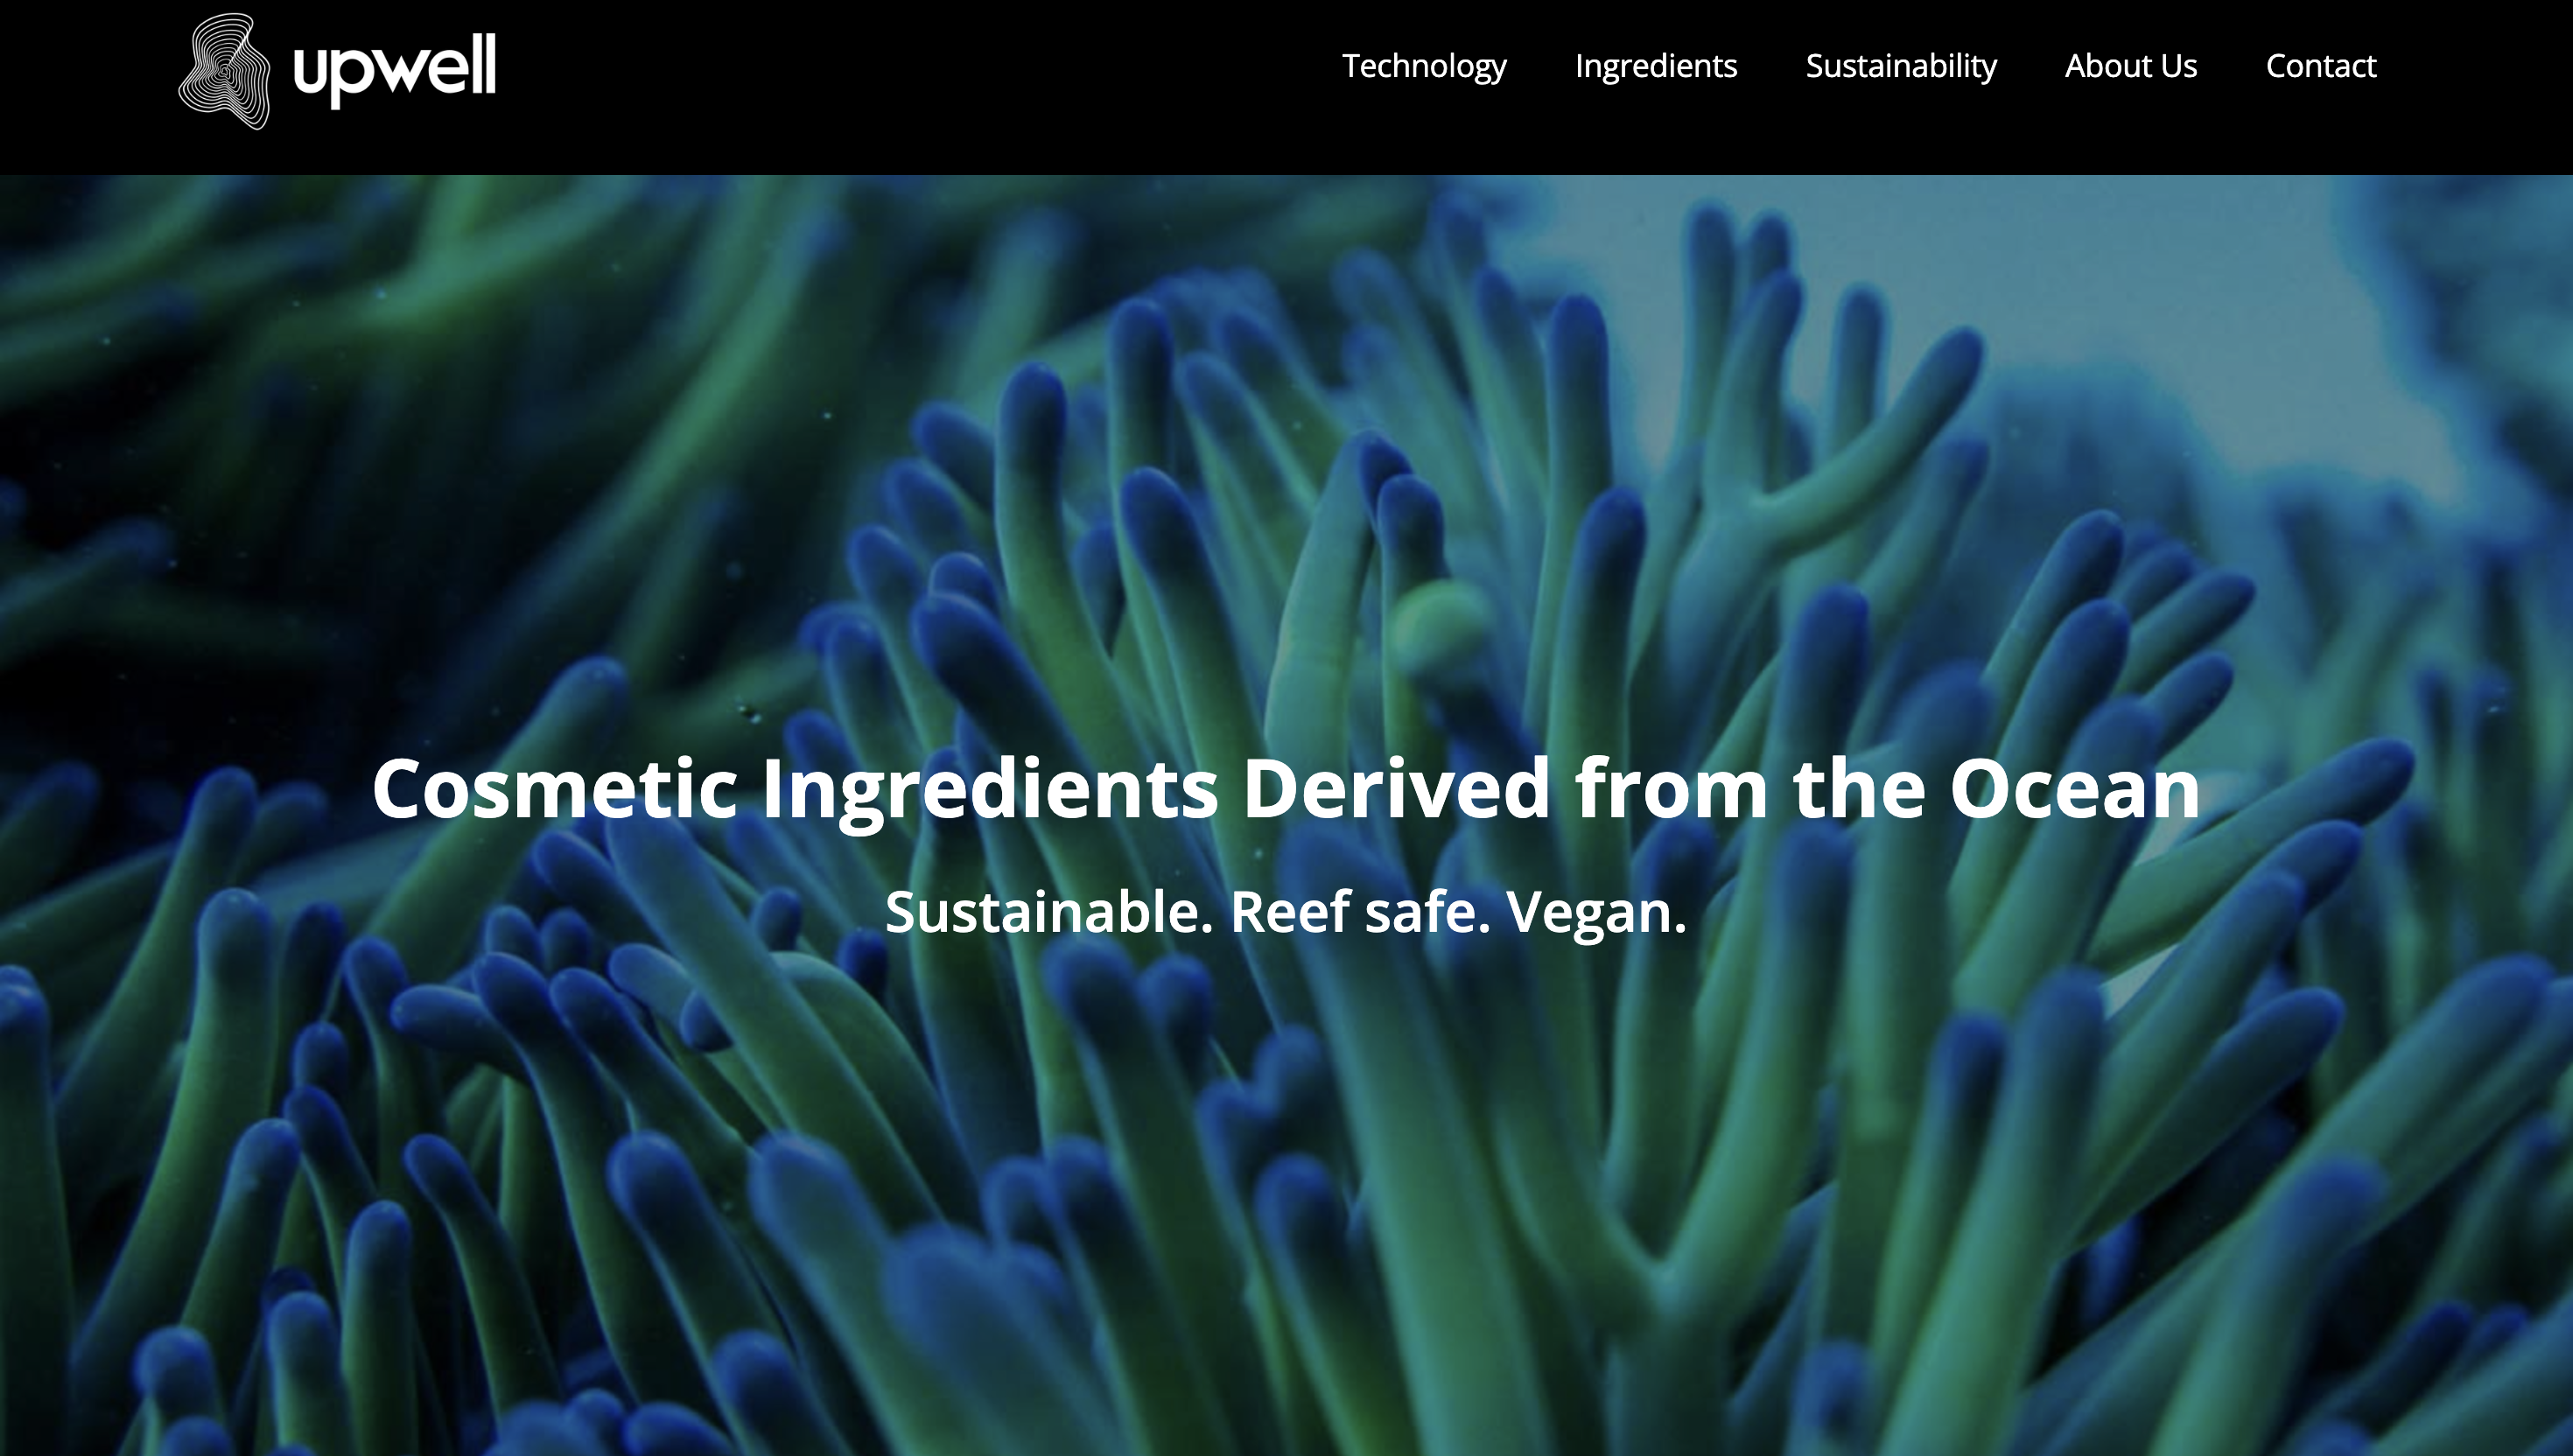 Upwell Extracts Wax from Microalgae as a Potential Alternative to Petroleum and Animal-based Waxes in Beauty Products